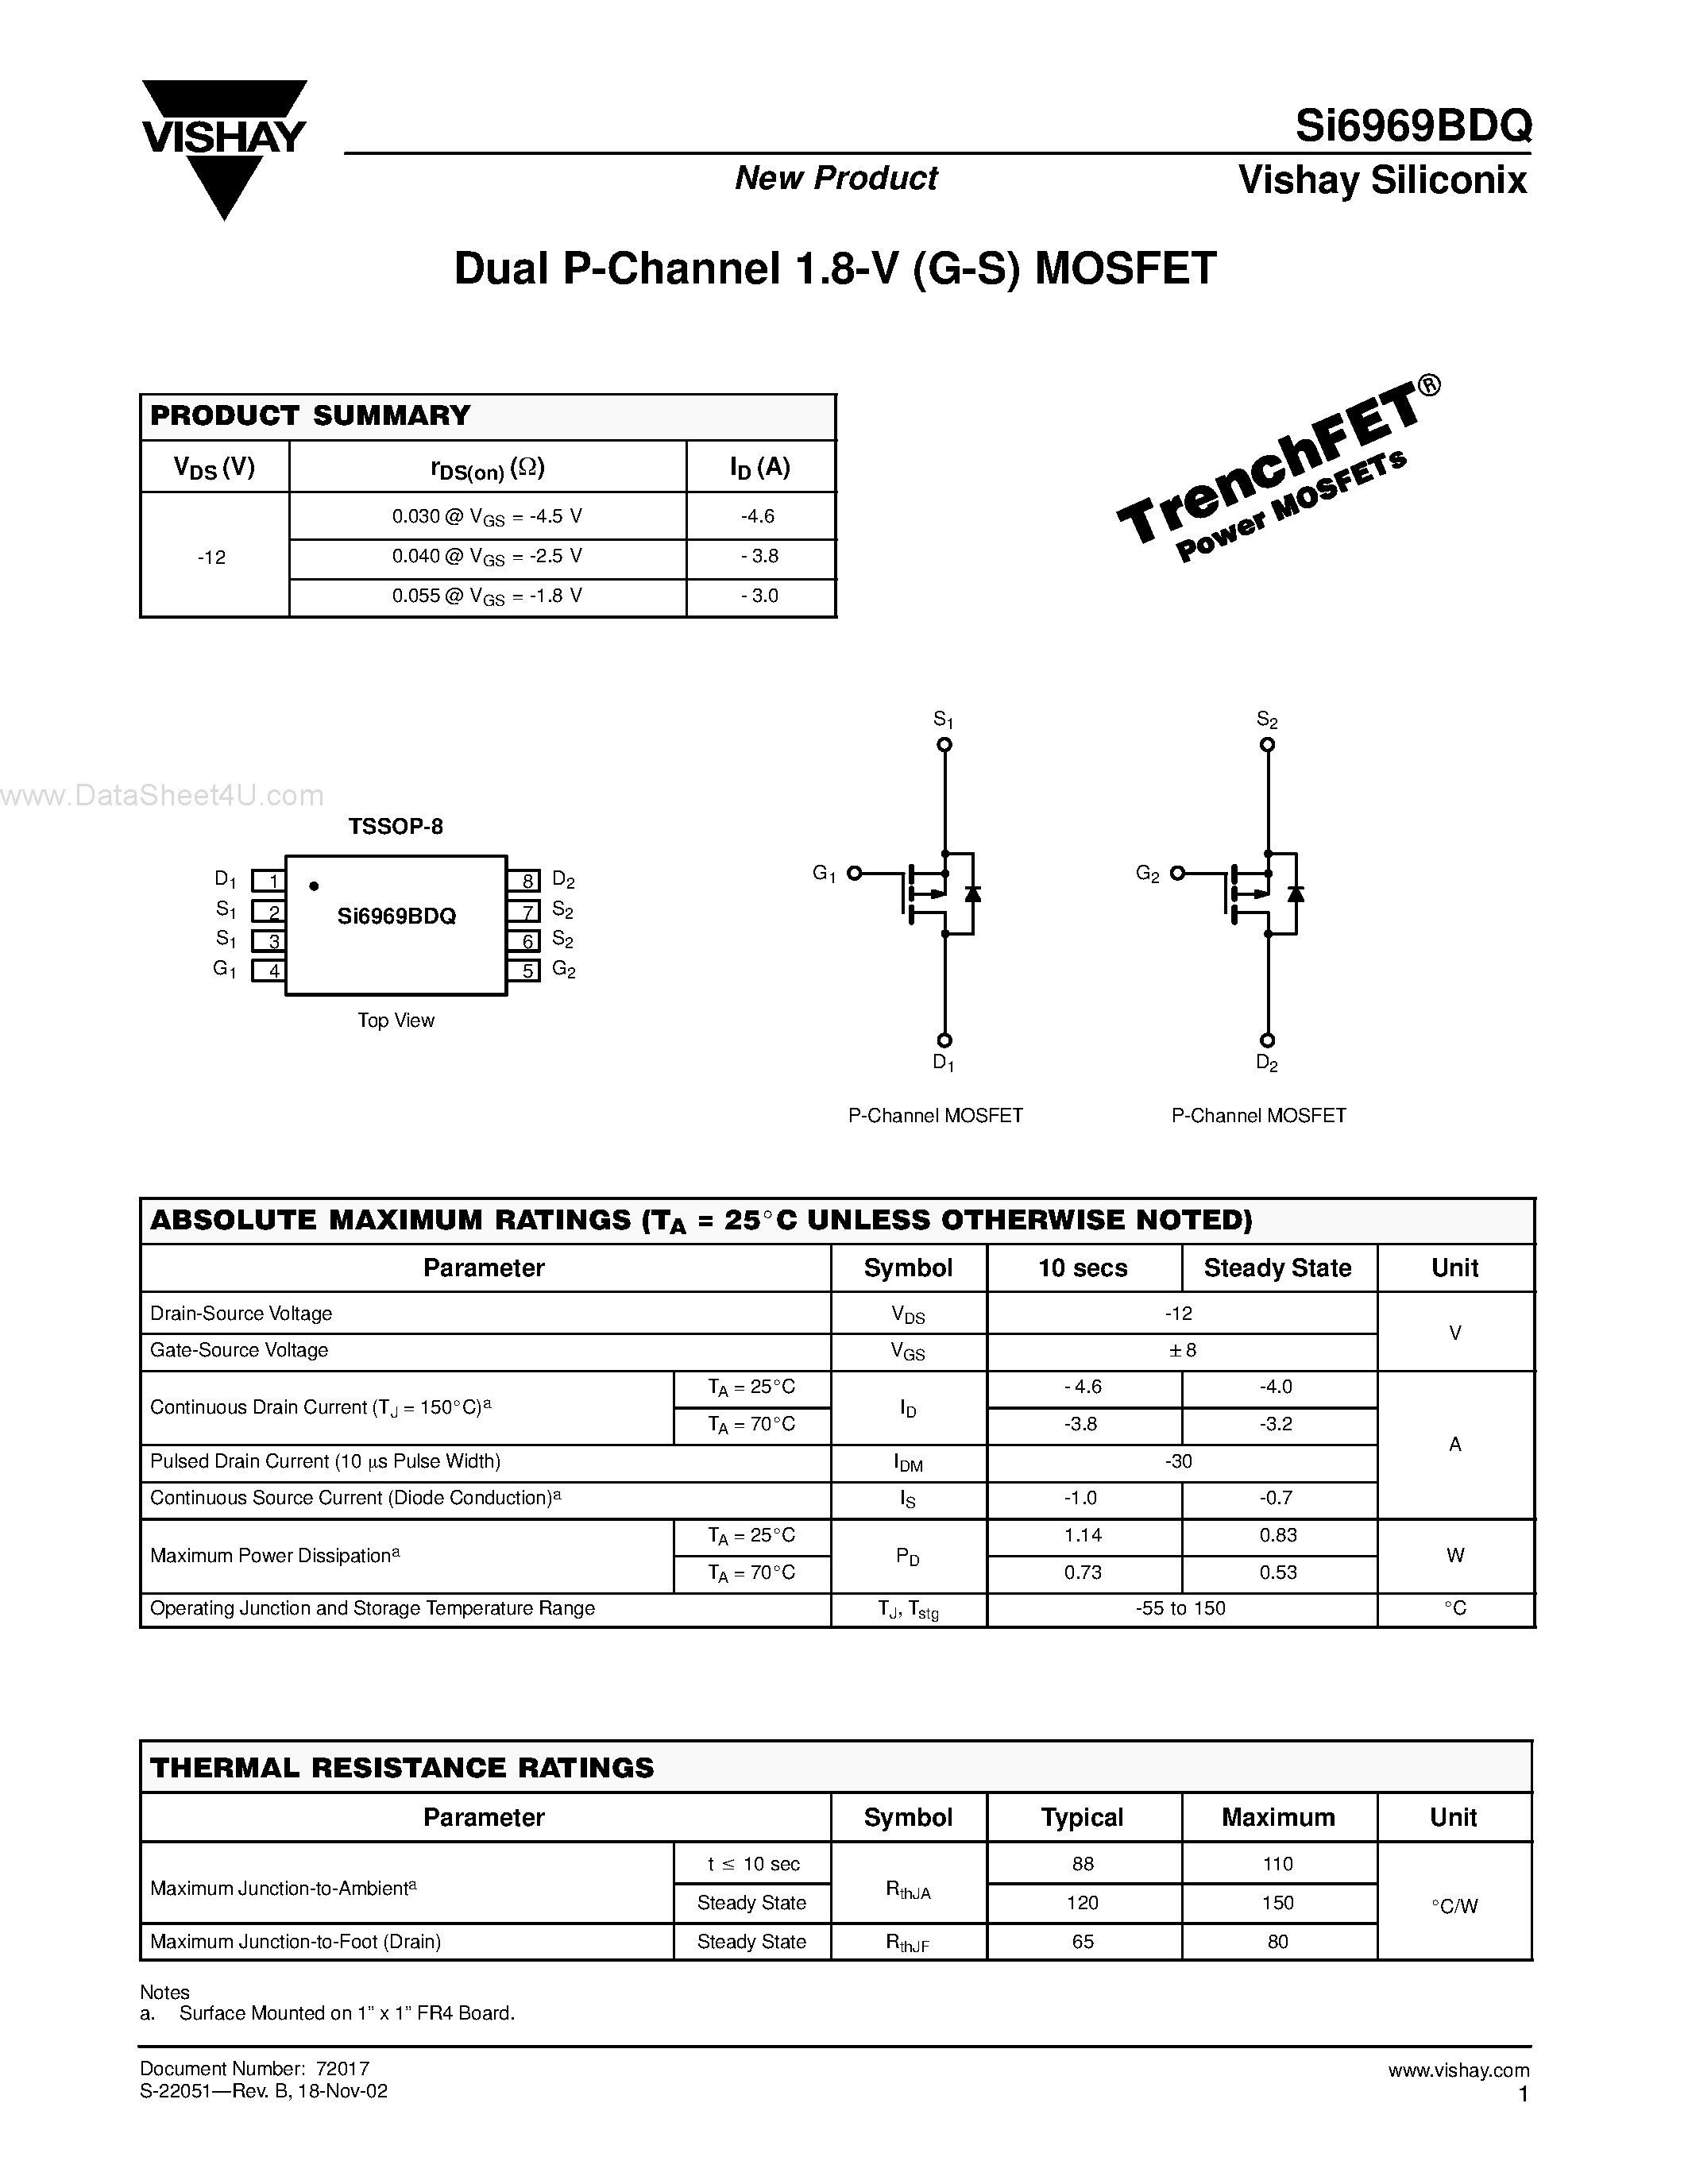 Даташит SI6969BDQ - Dual P-Channel 1.8-V (G-S) MOSFET страница 1